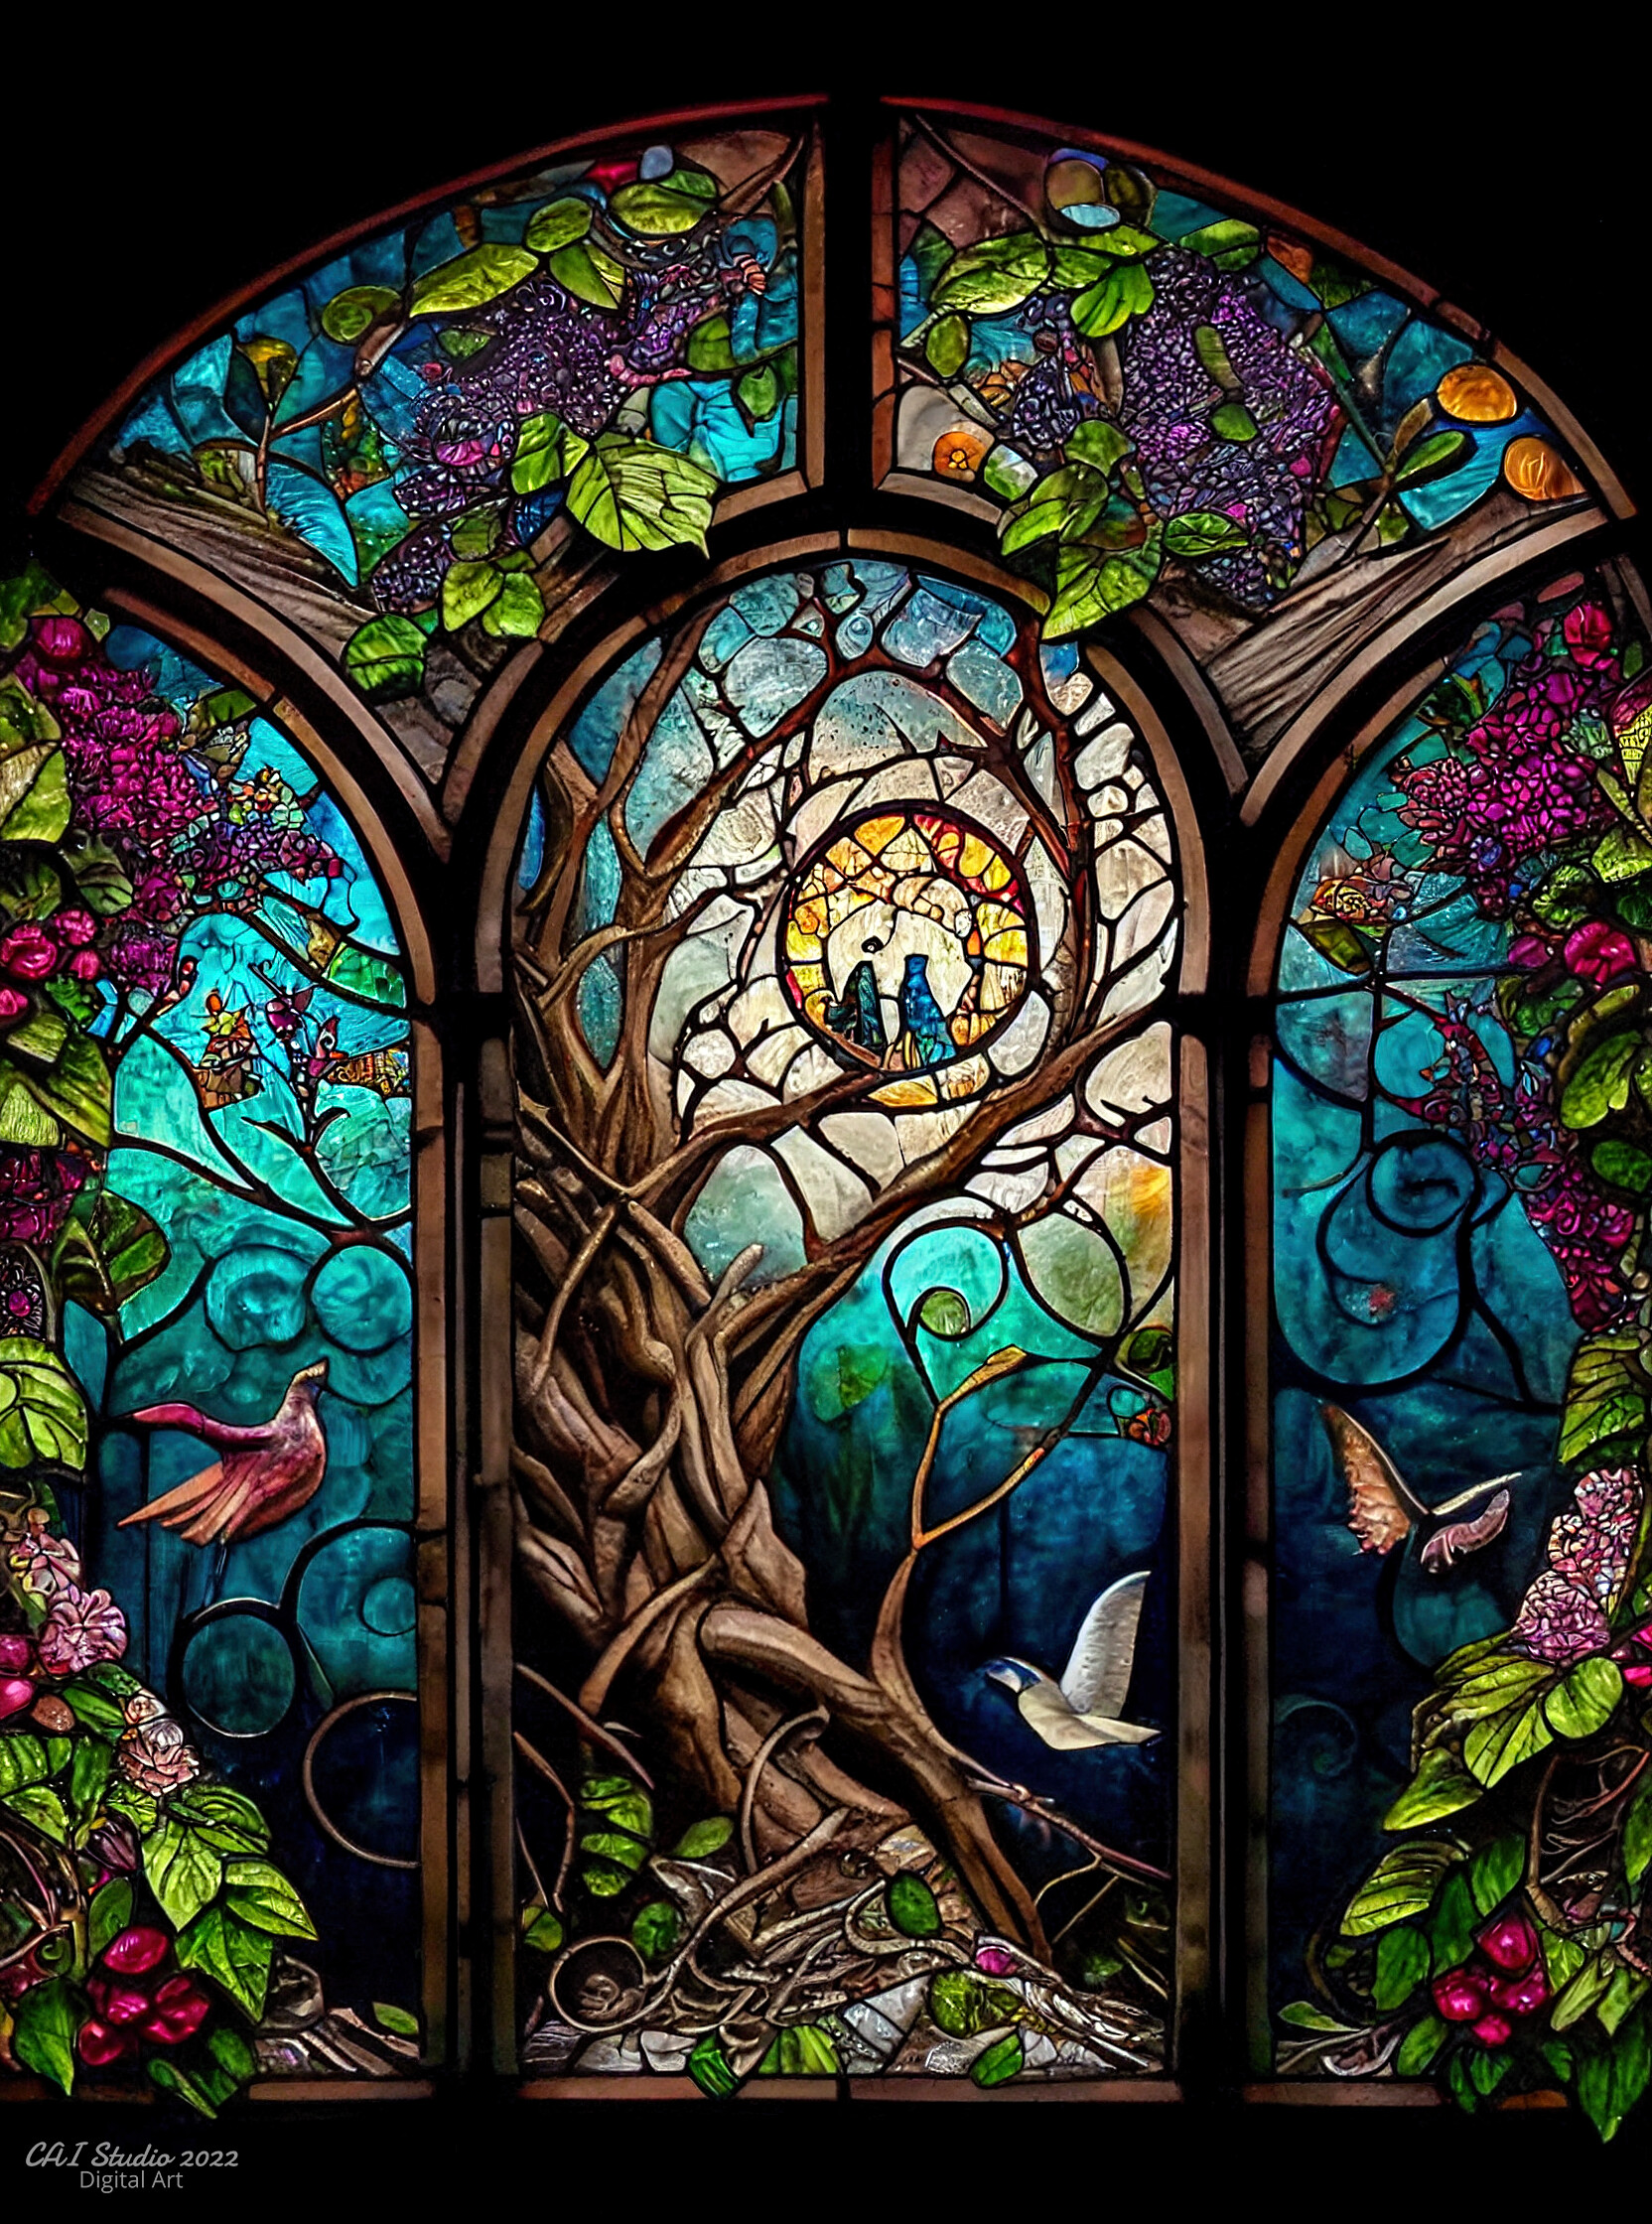 https://cdnb.artstation.com/p/assets/images/images/056/805/019/large/christer-w-stained-glass-windows-01.jpg?1670149782